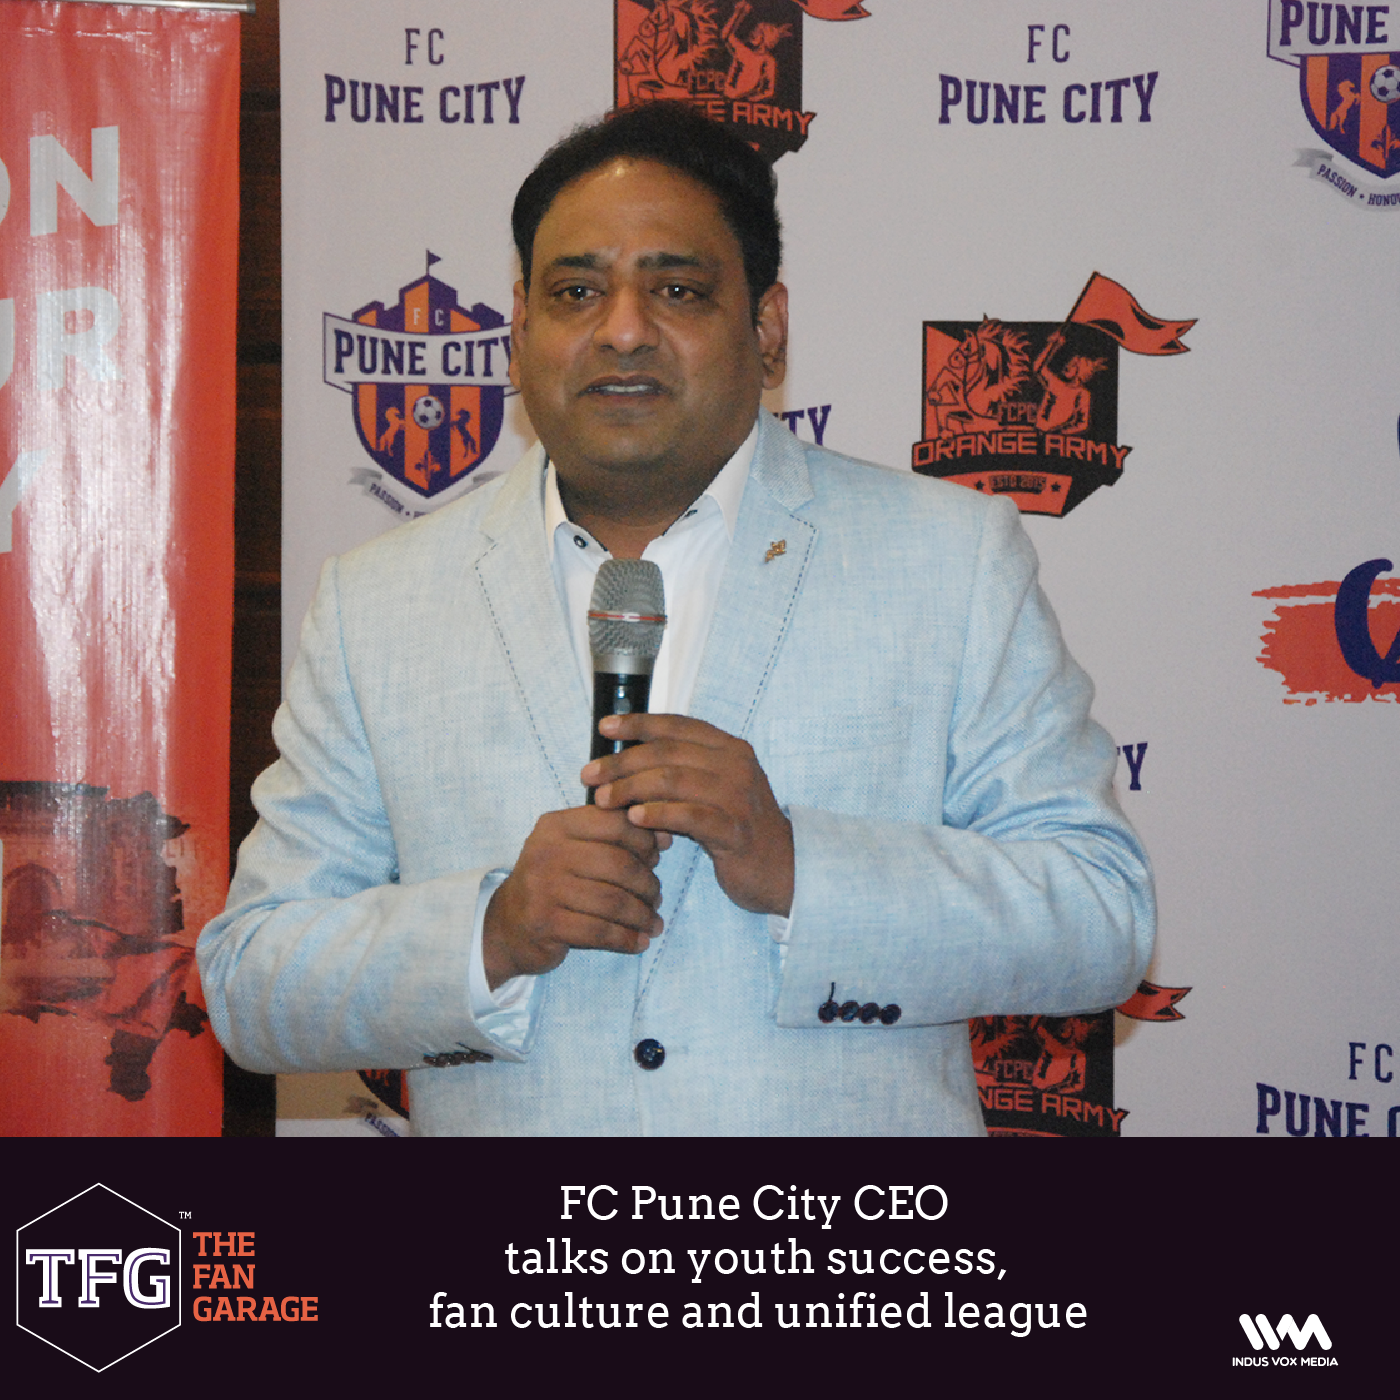 TFG interviews Ep. 037: FC Pune City CEO talks on youth success, fan culture and unified league